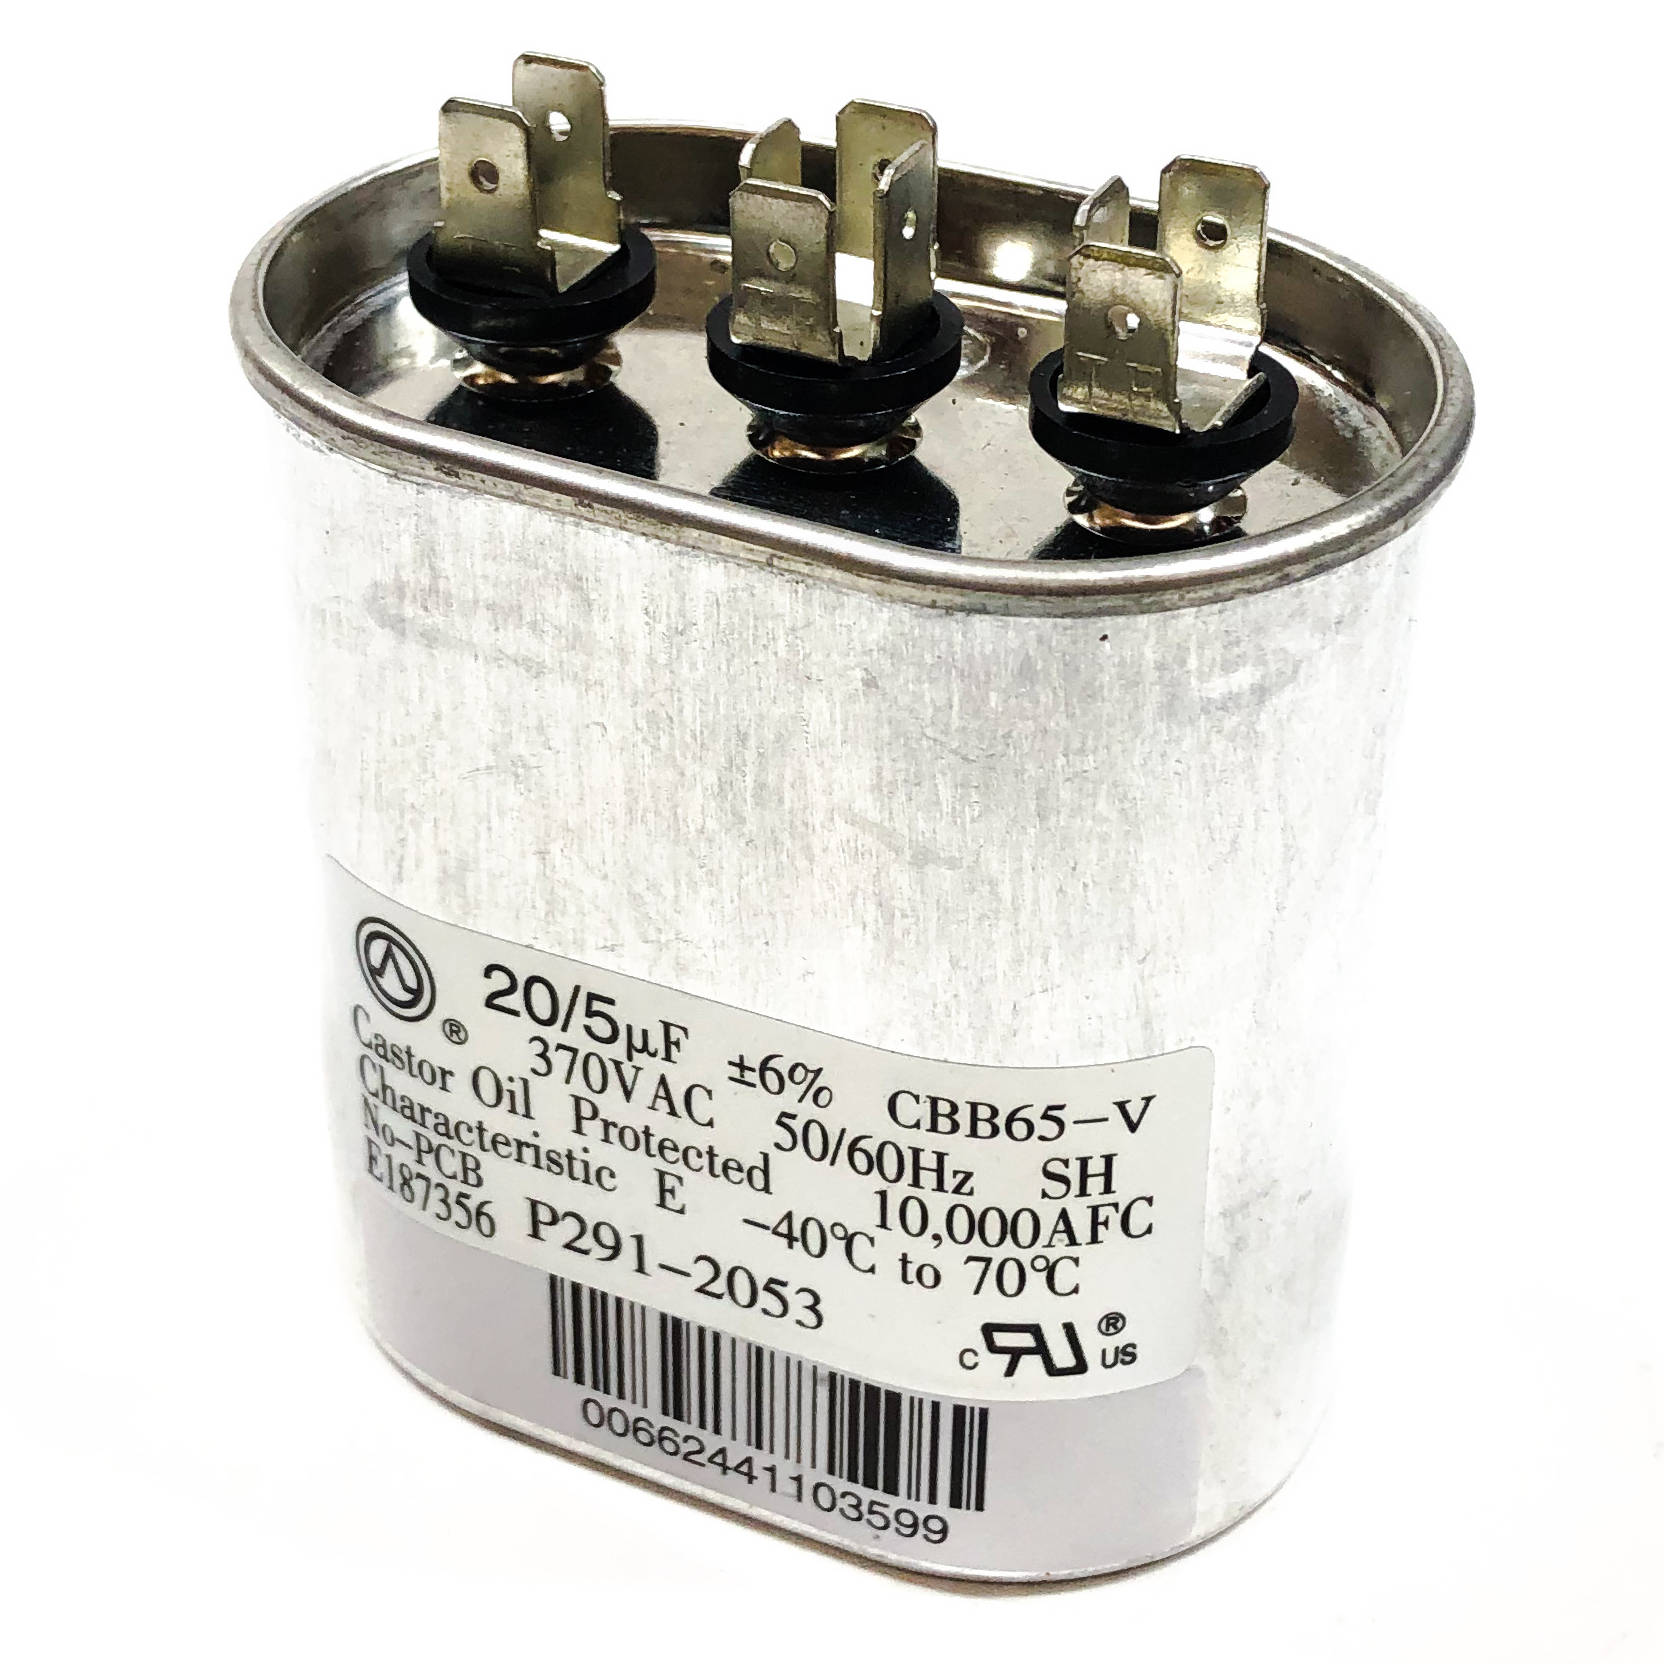 291-2053 Carrier Run Capacitor, Oval, 370VAC 20/5uF 12